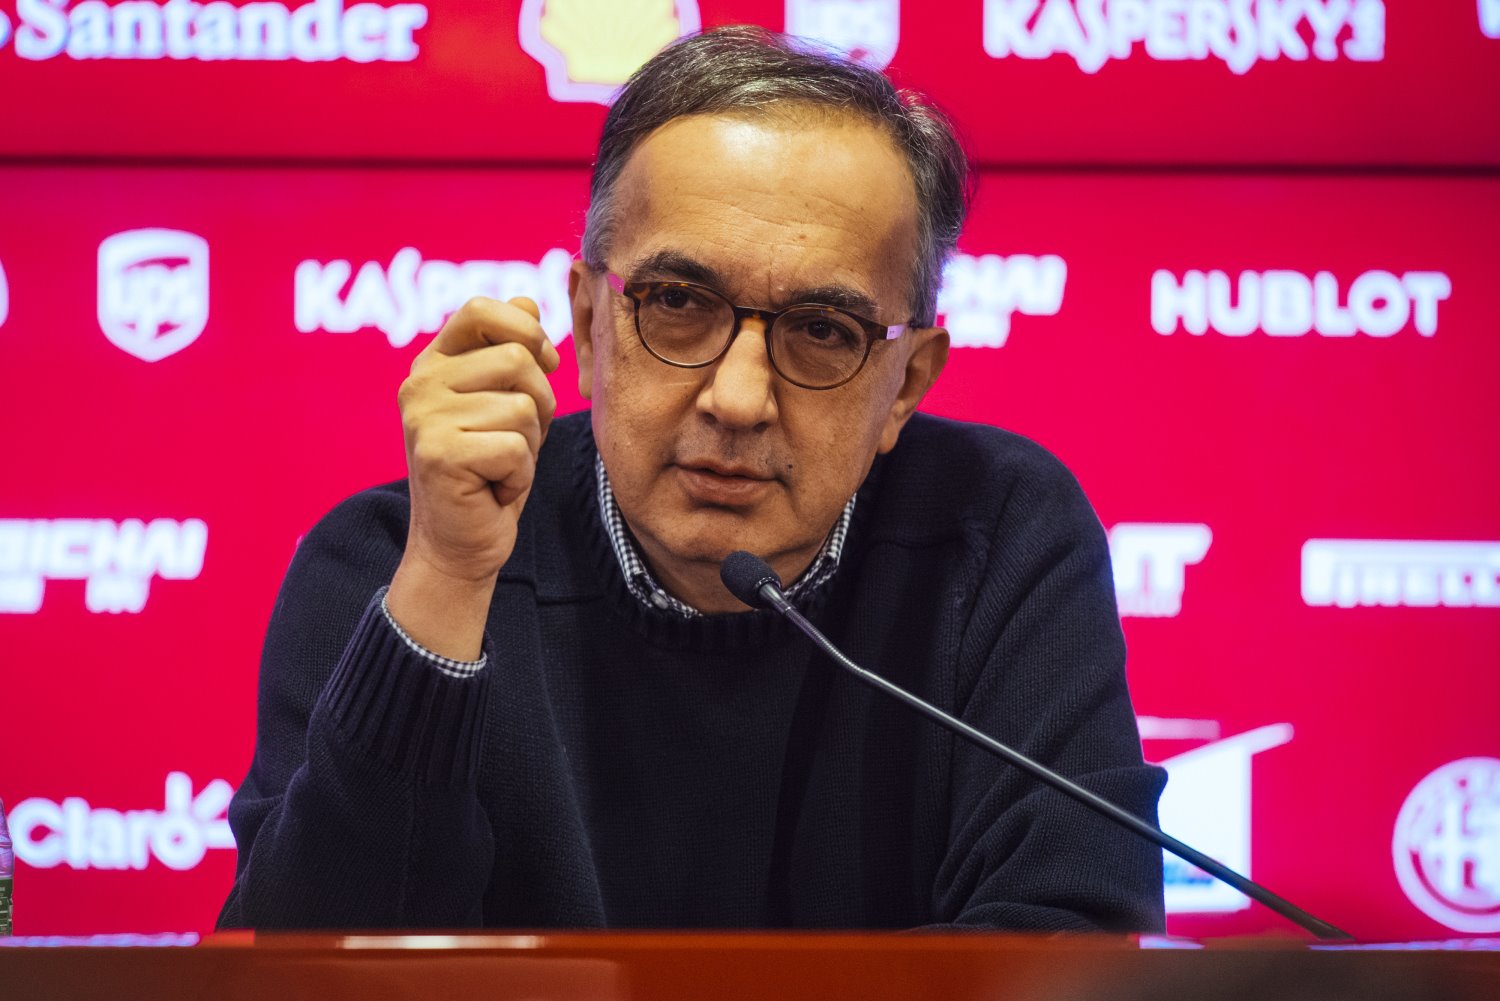 Sergio Marchionne thinks VW should join them in spending hundreds of million dollars in F1